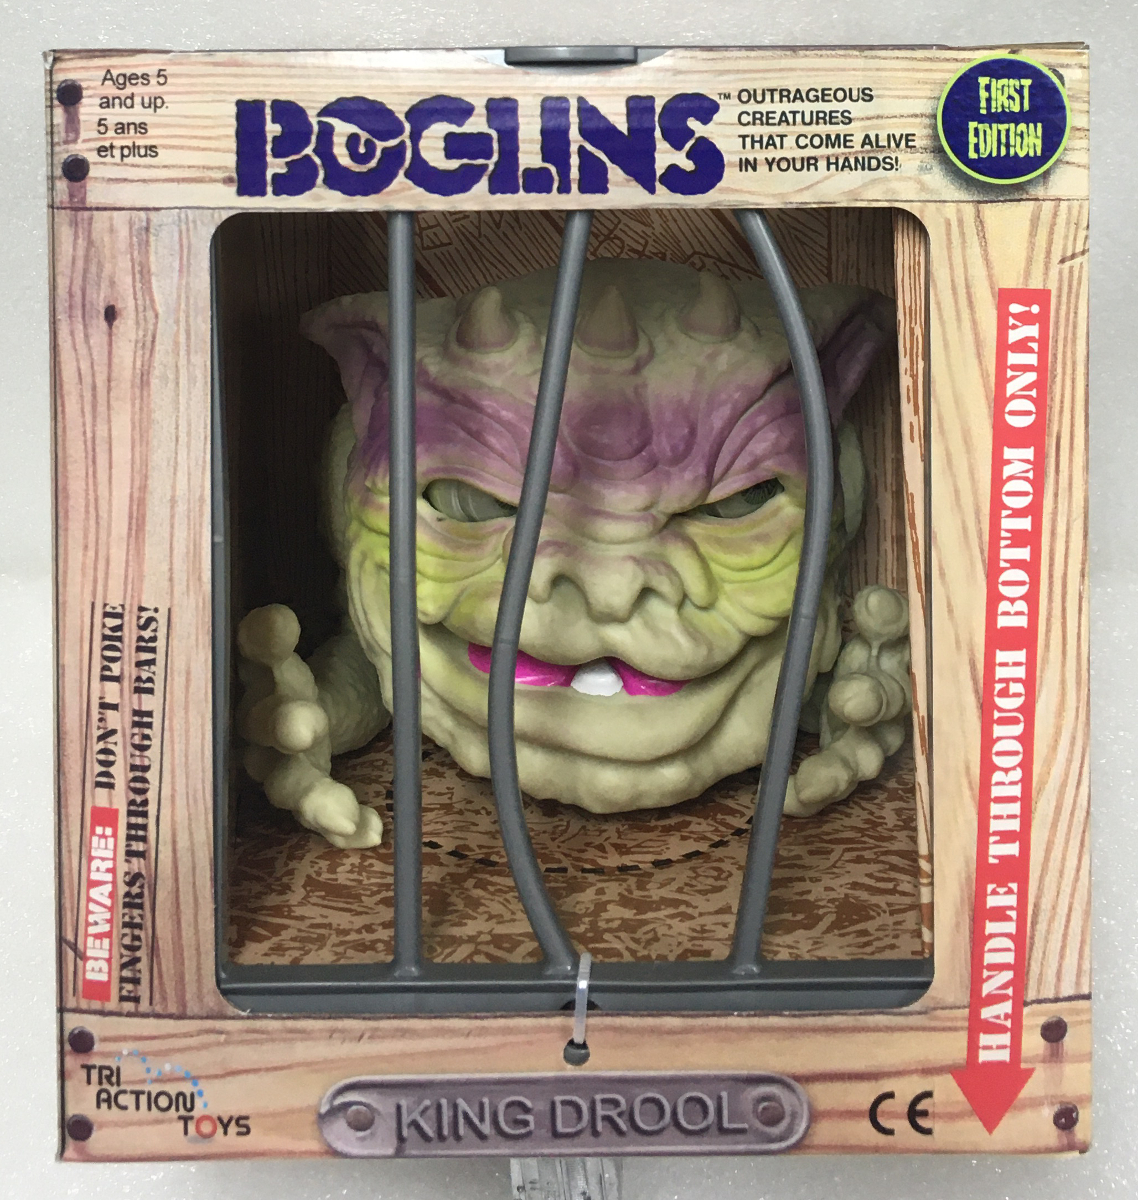 MIB Tri Action Toys First Edition King Drool Boglins Puppet: Mint in Box 1